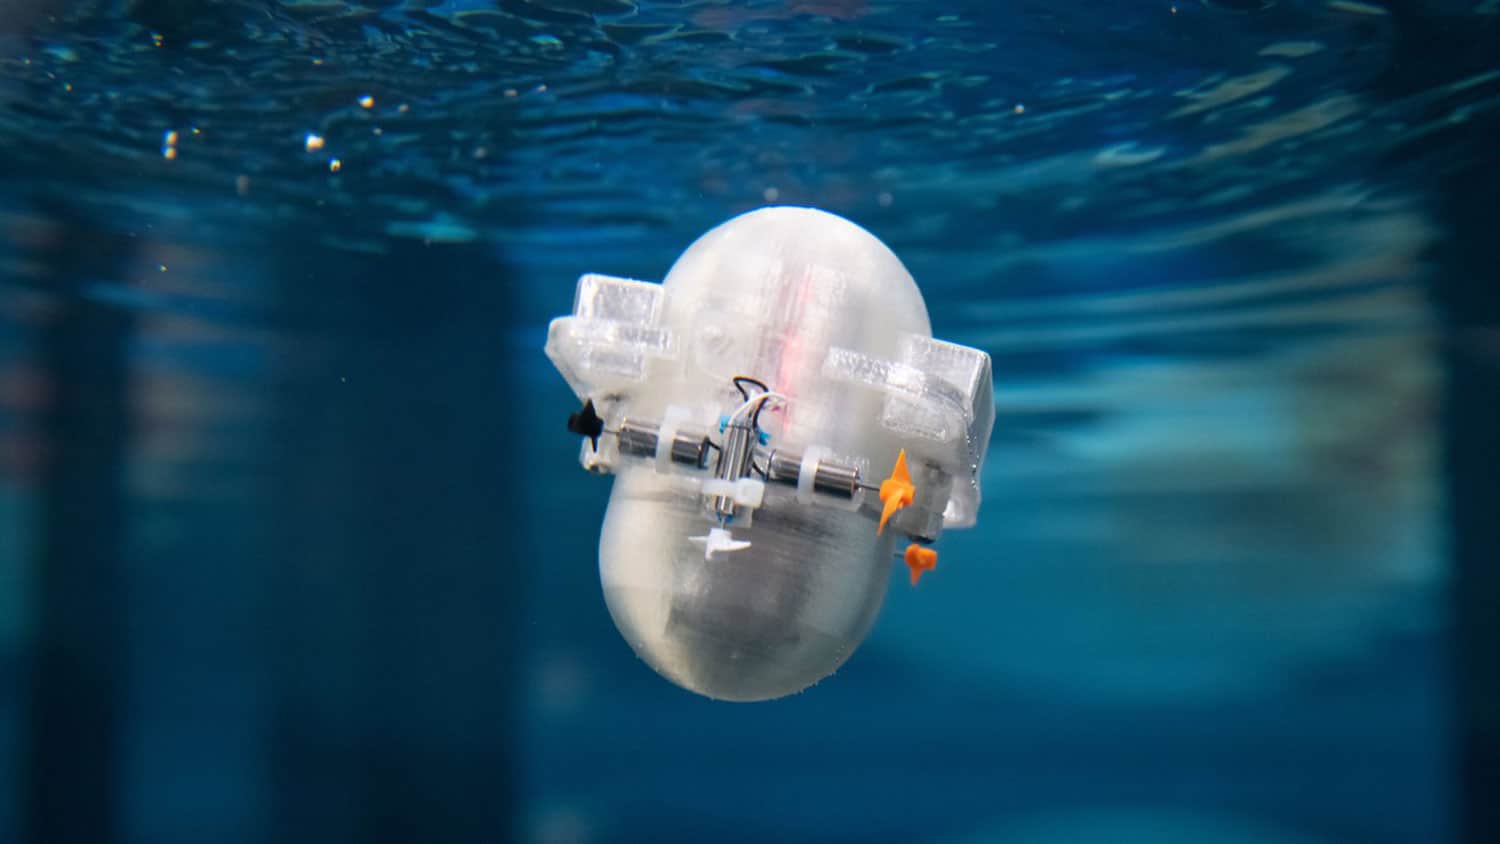 The team developed a small palm-sized robot that runs the algorithm on a tiny computer chip that could power seaborne drones.